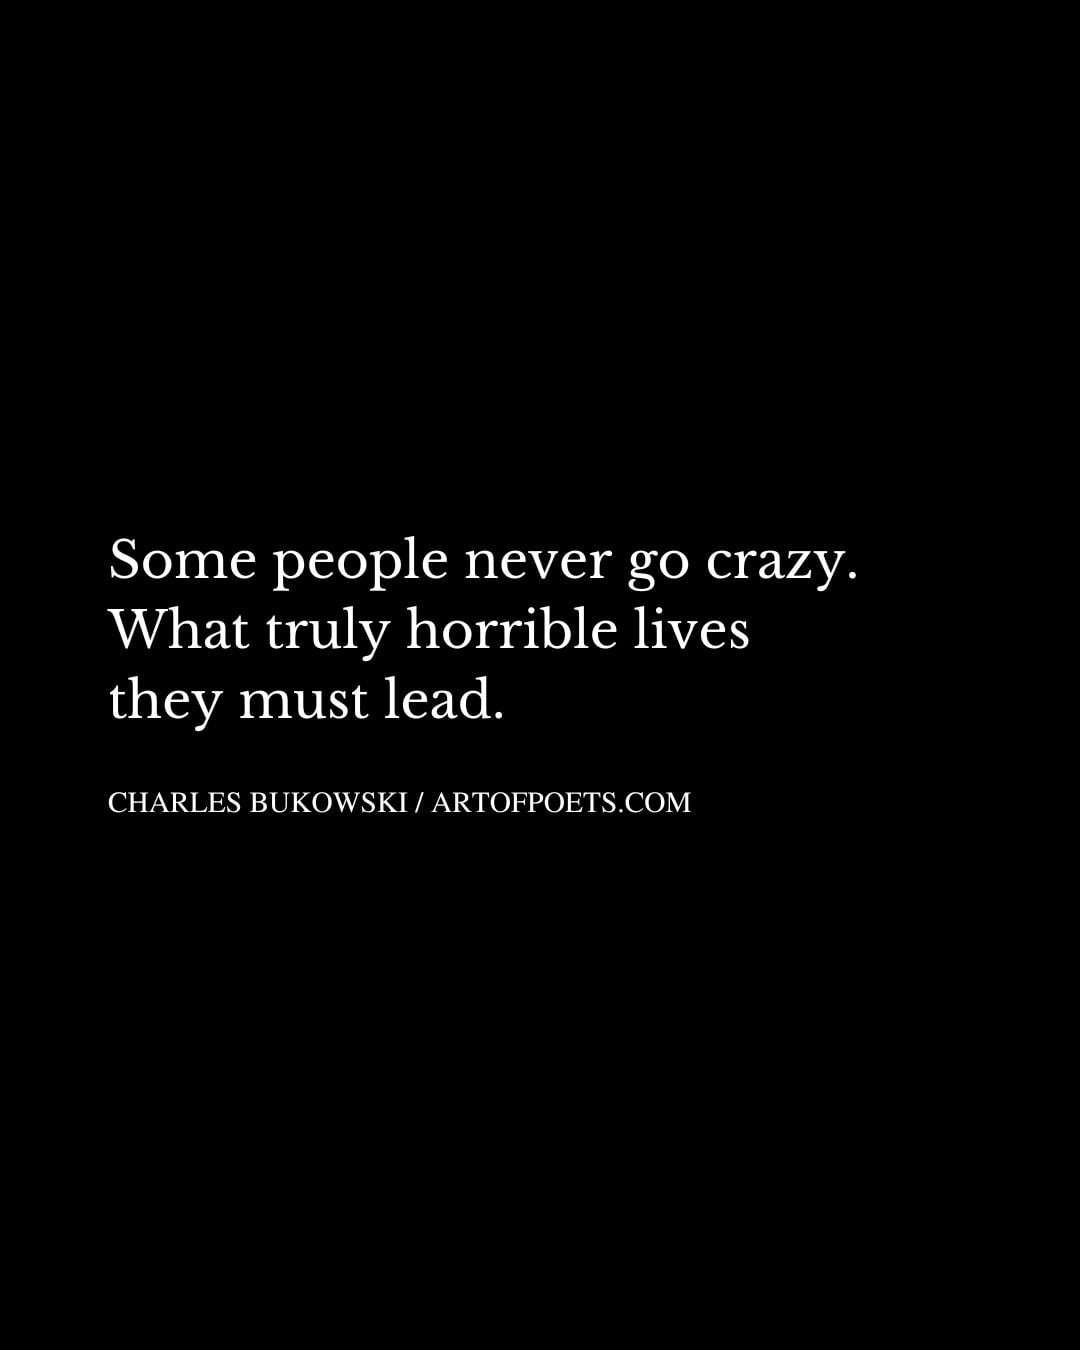 Some people never go crazy. What truly horrible lives they must lead